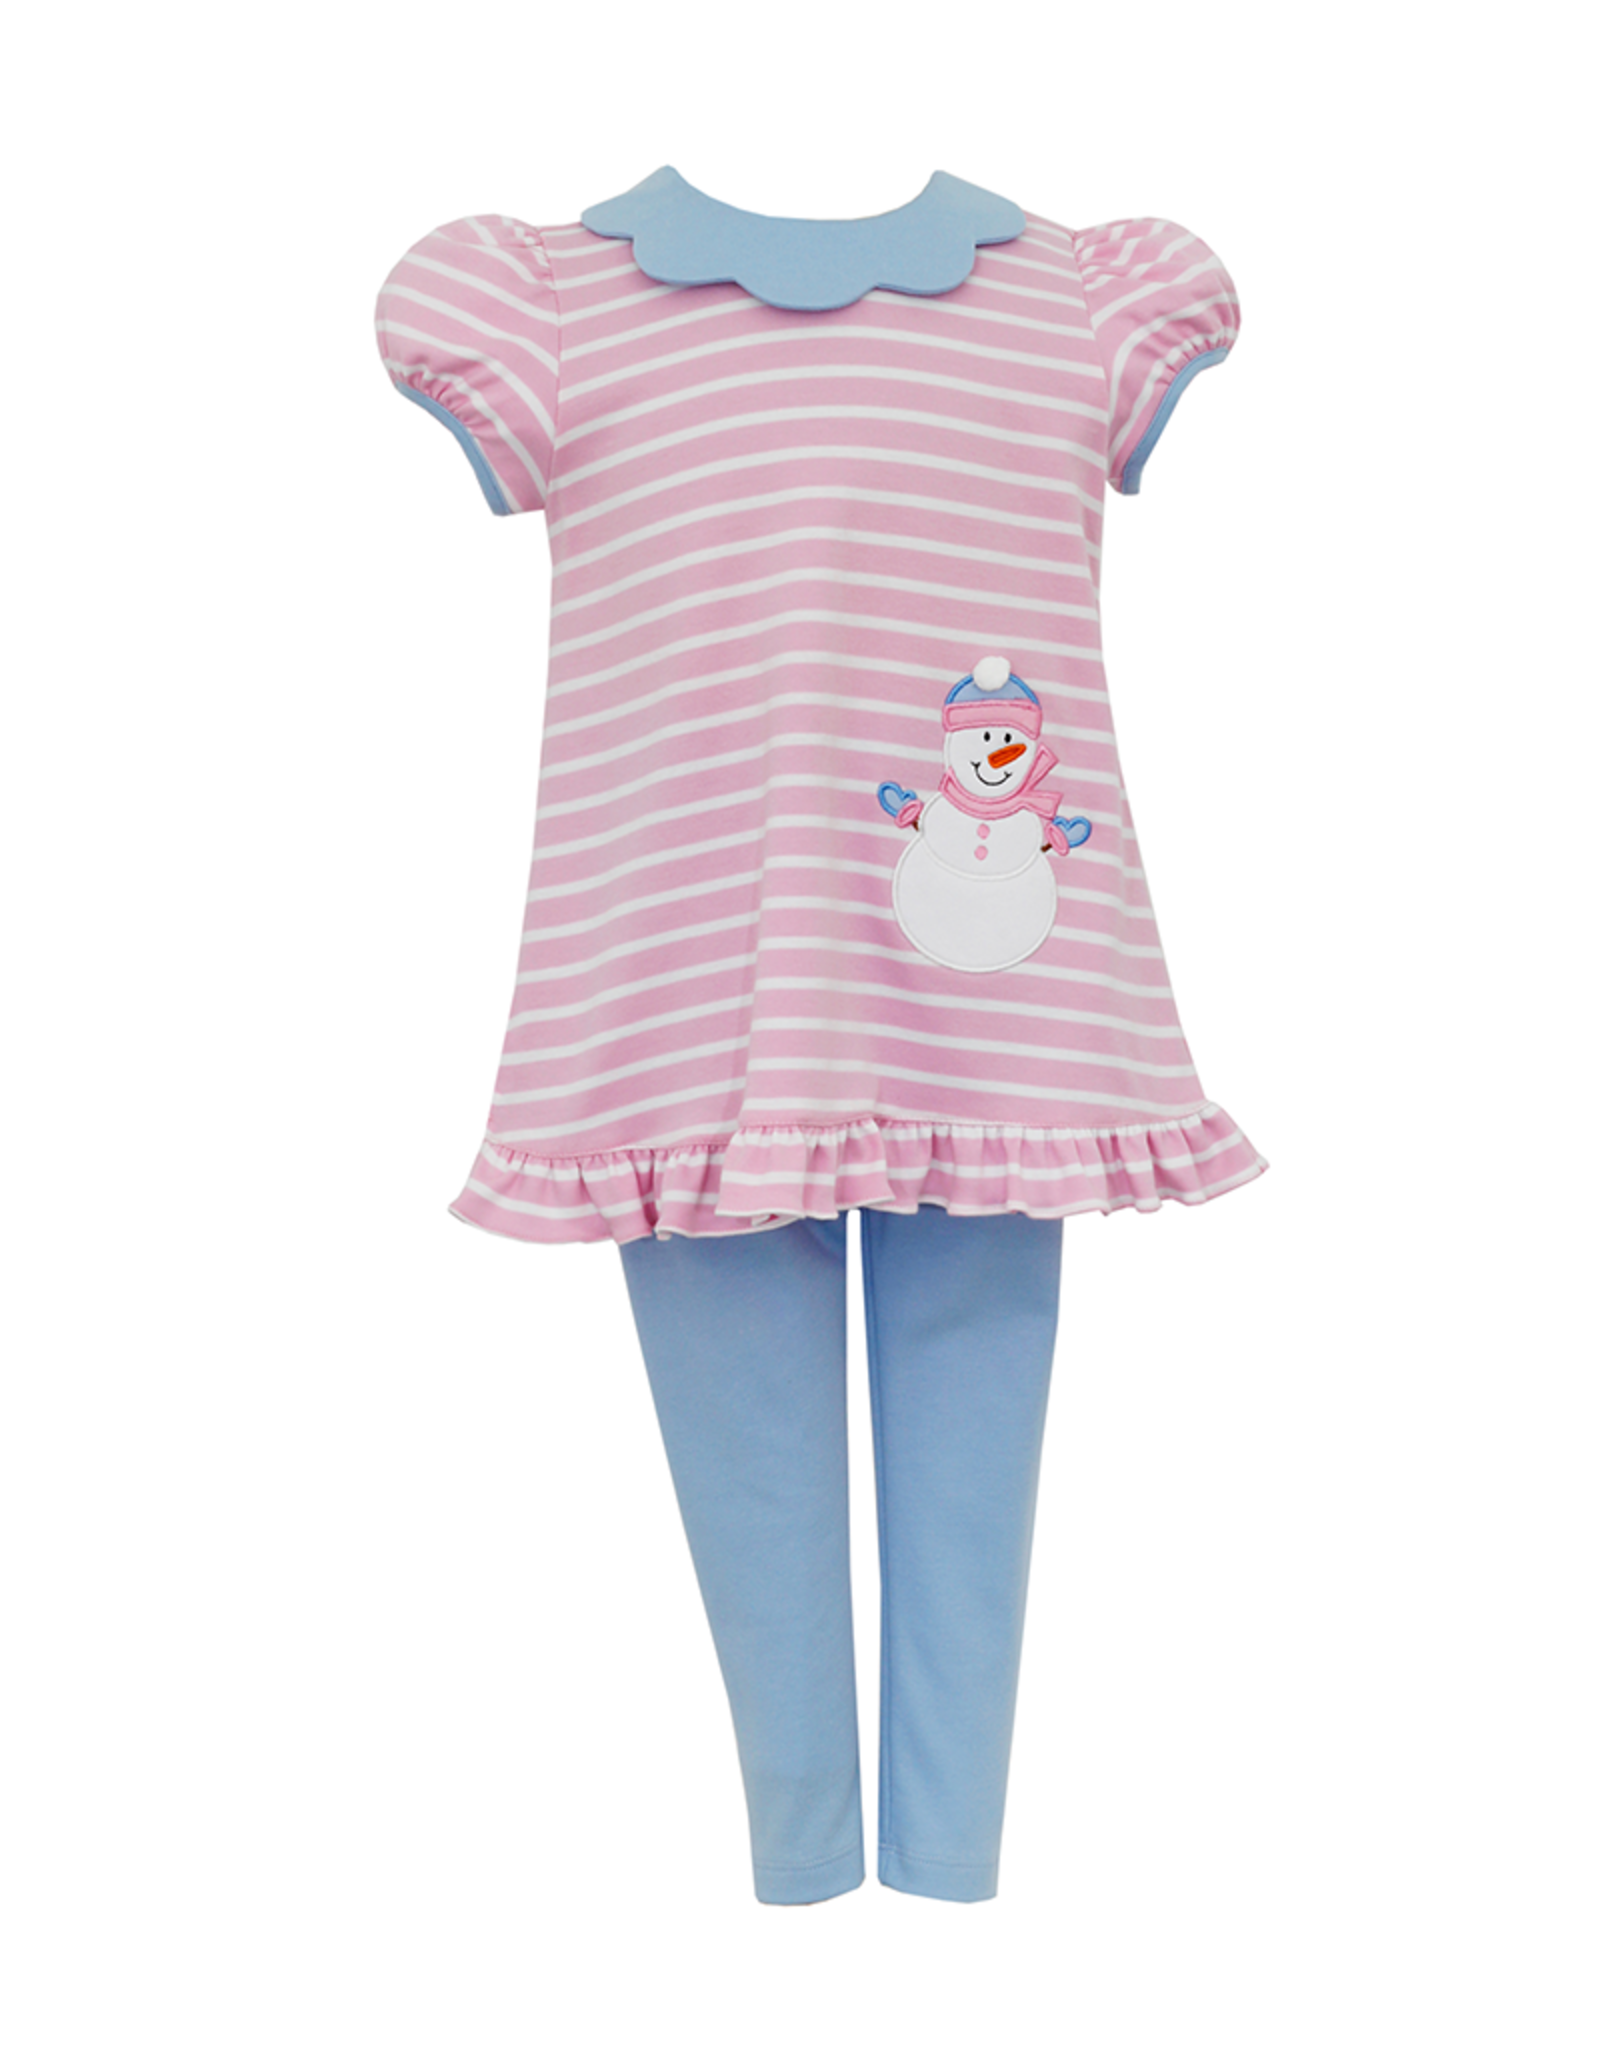 Claire and Charlie 5032N Snowgirl Tunic Set